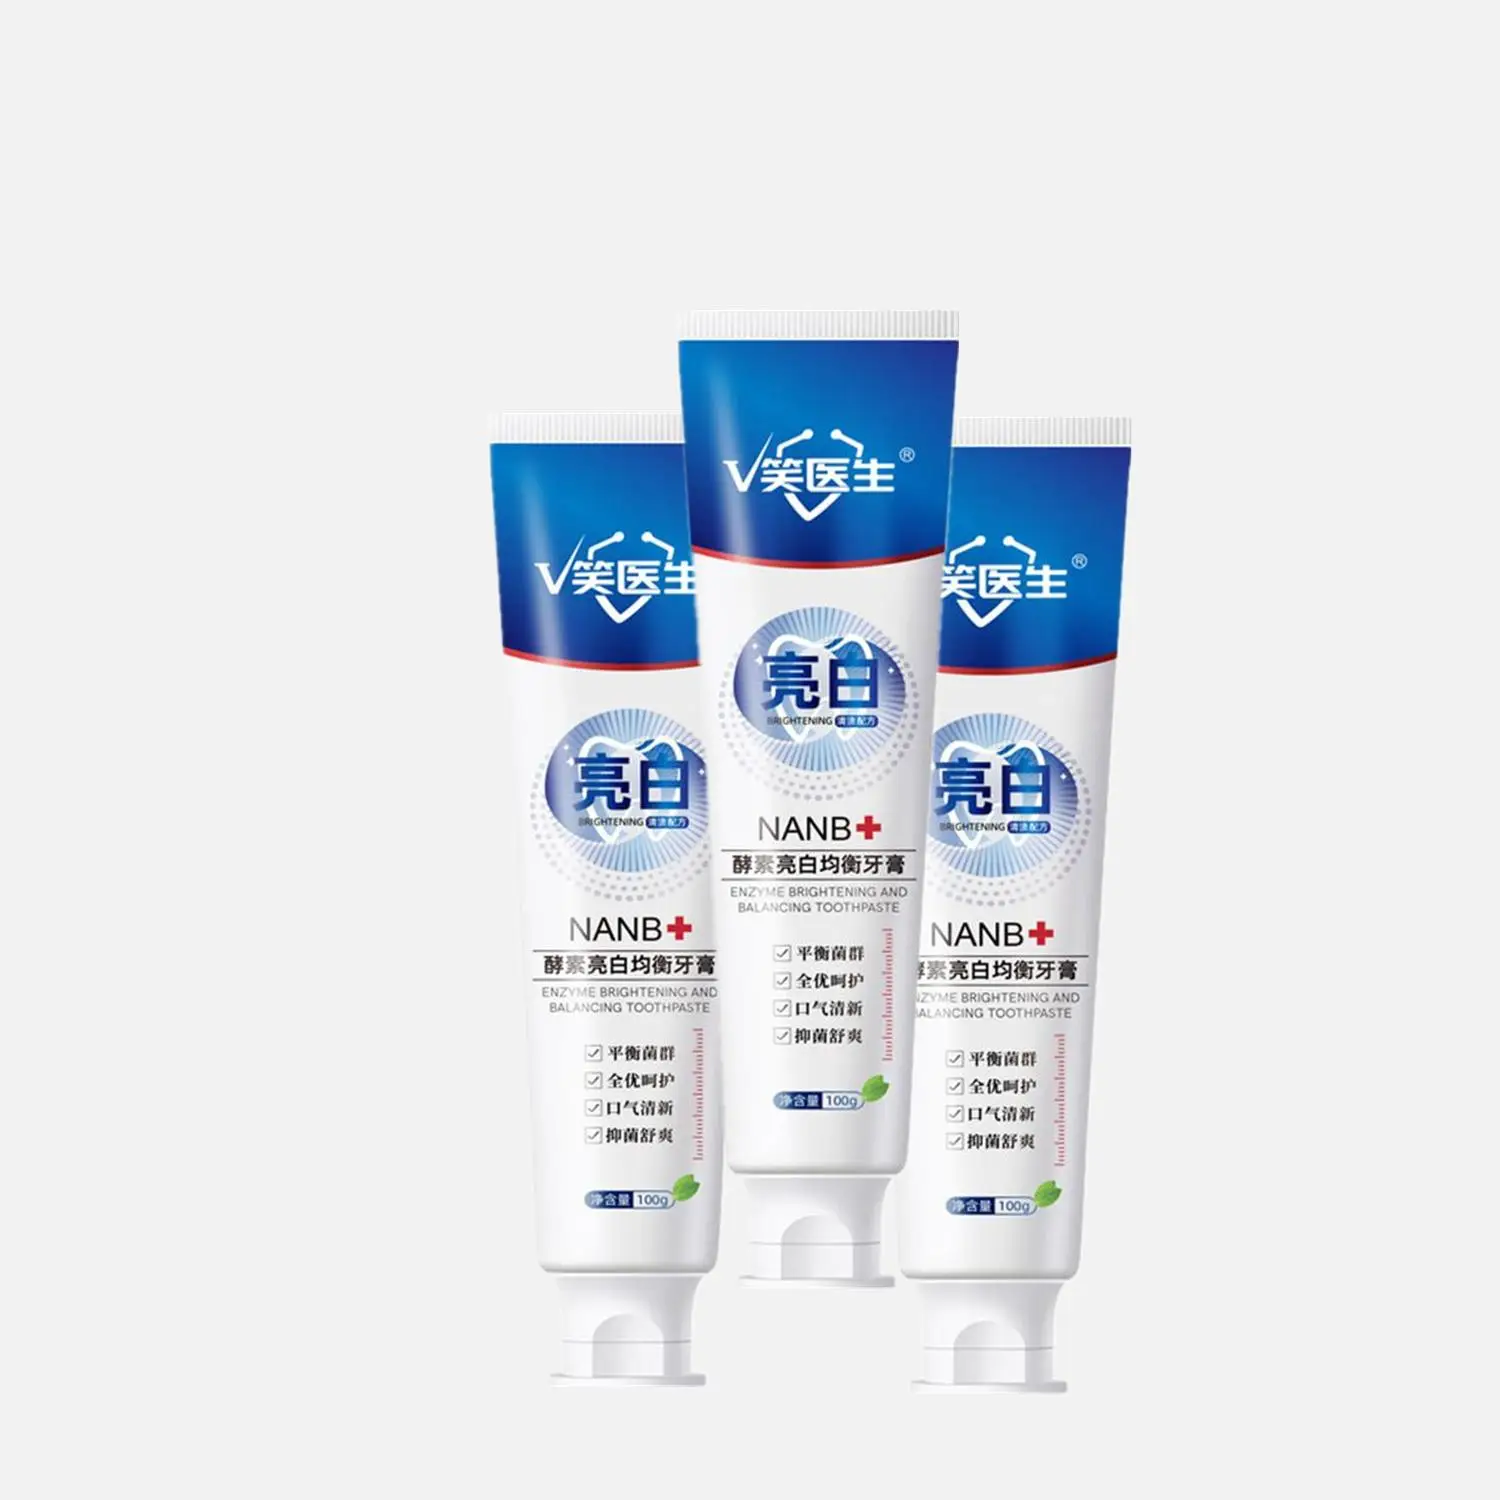 

3PCS 100g Repair Toothpaste Stop Teeth Bleeding Swelling Aching Of Gum Prevent Tooth Decay Deep Cleaning Whiten Adult Toothpaste